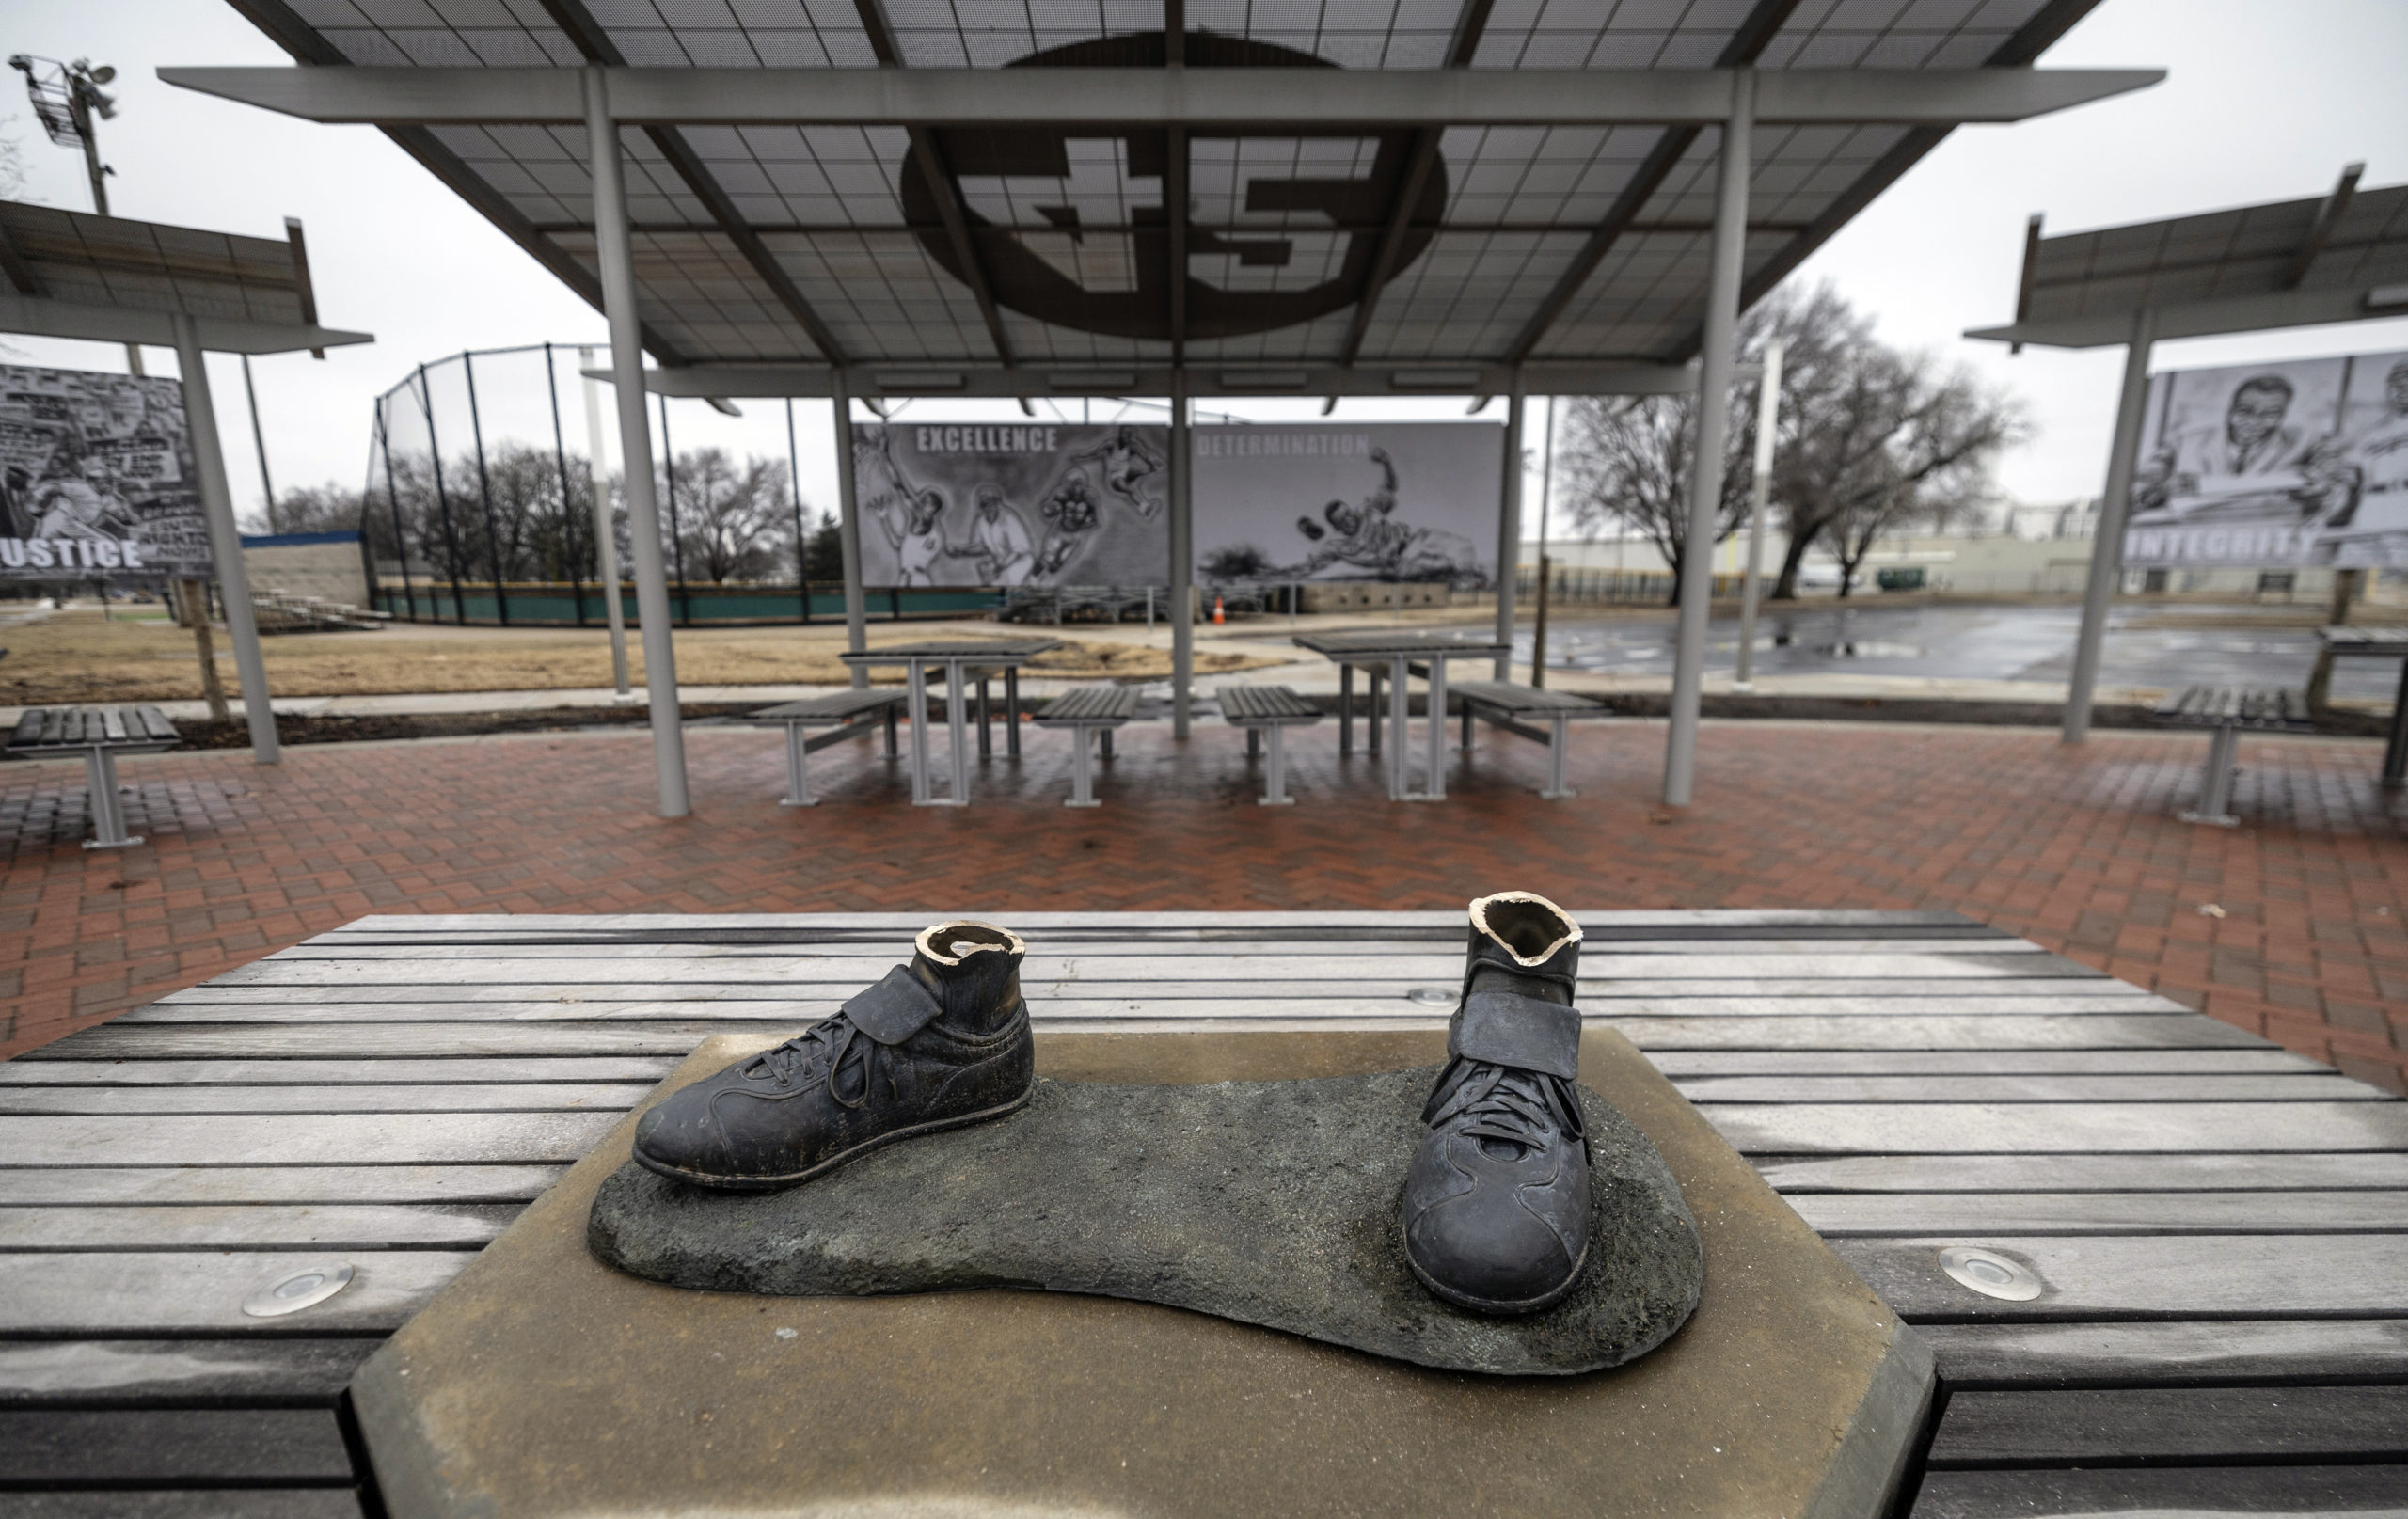 A bronze statue of legendary baseball pioneer Jackie Robinson was stolen from a park in Wichita, Kansas, during the early morning hours of Thursday.